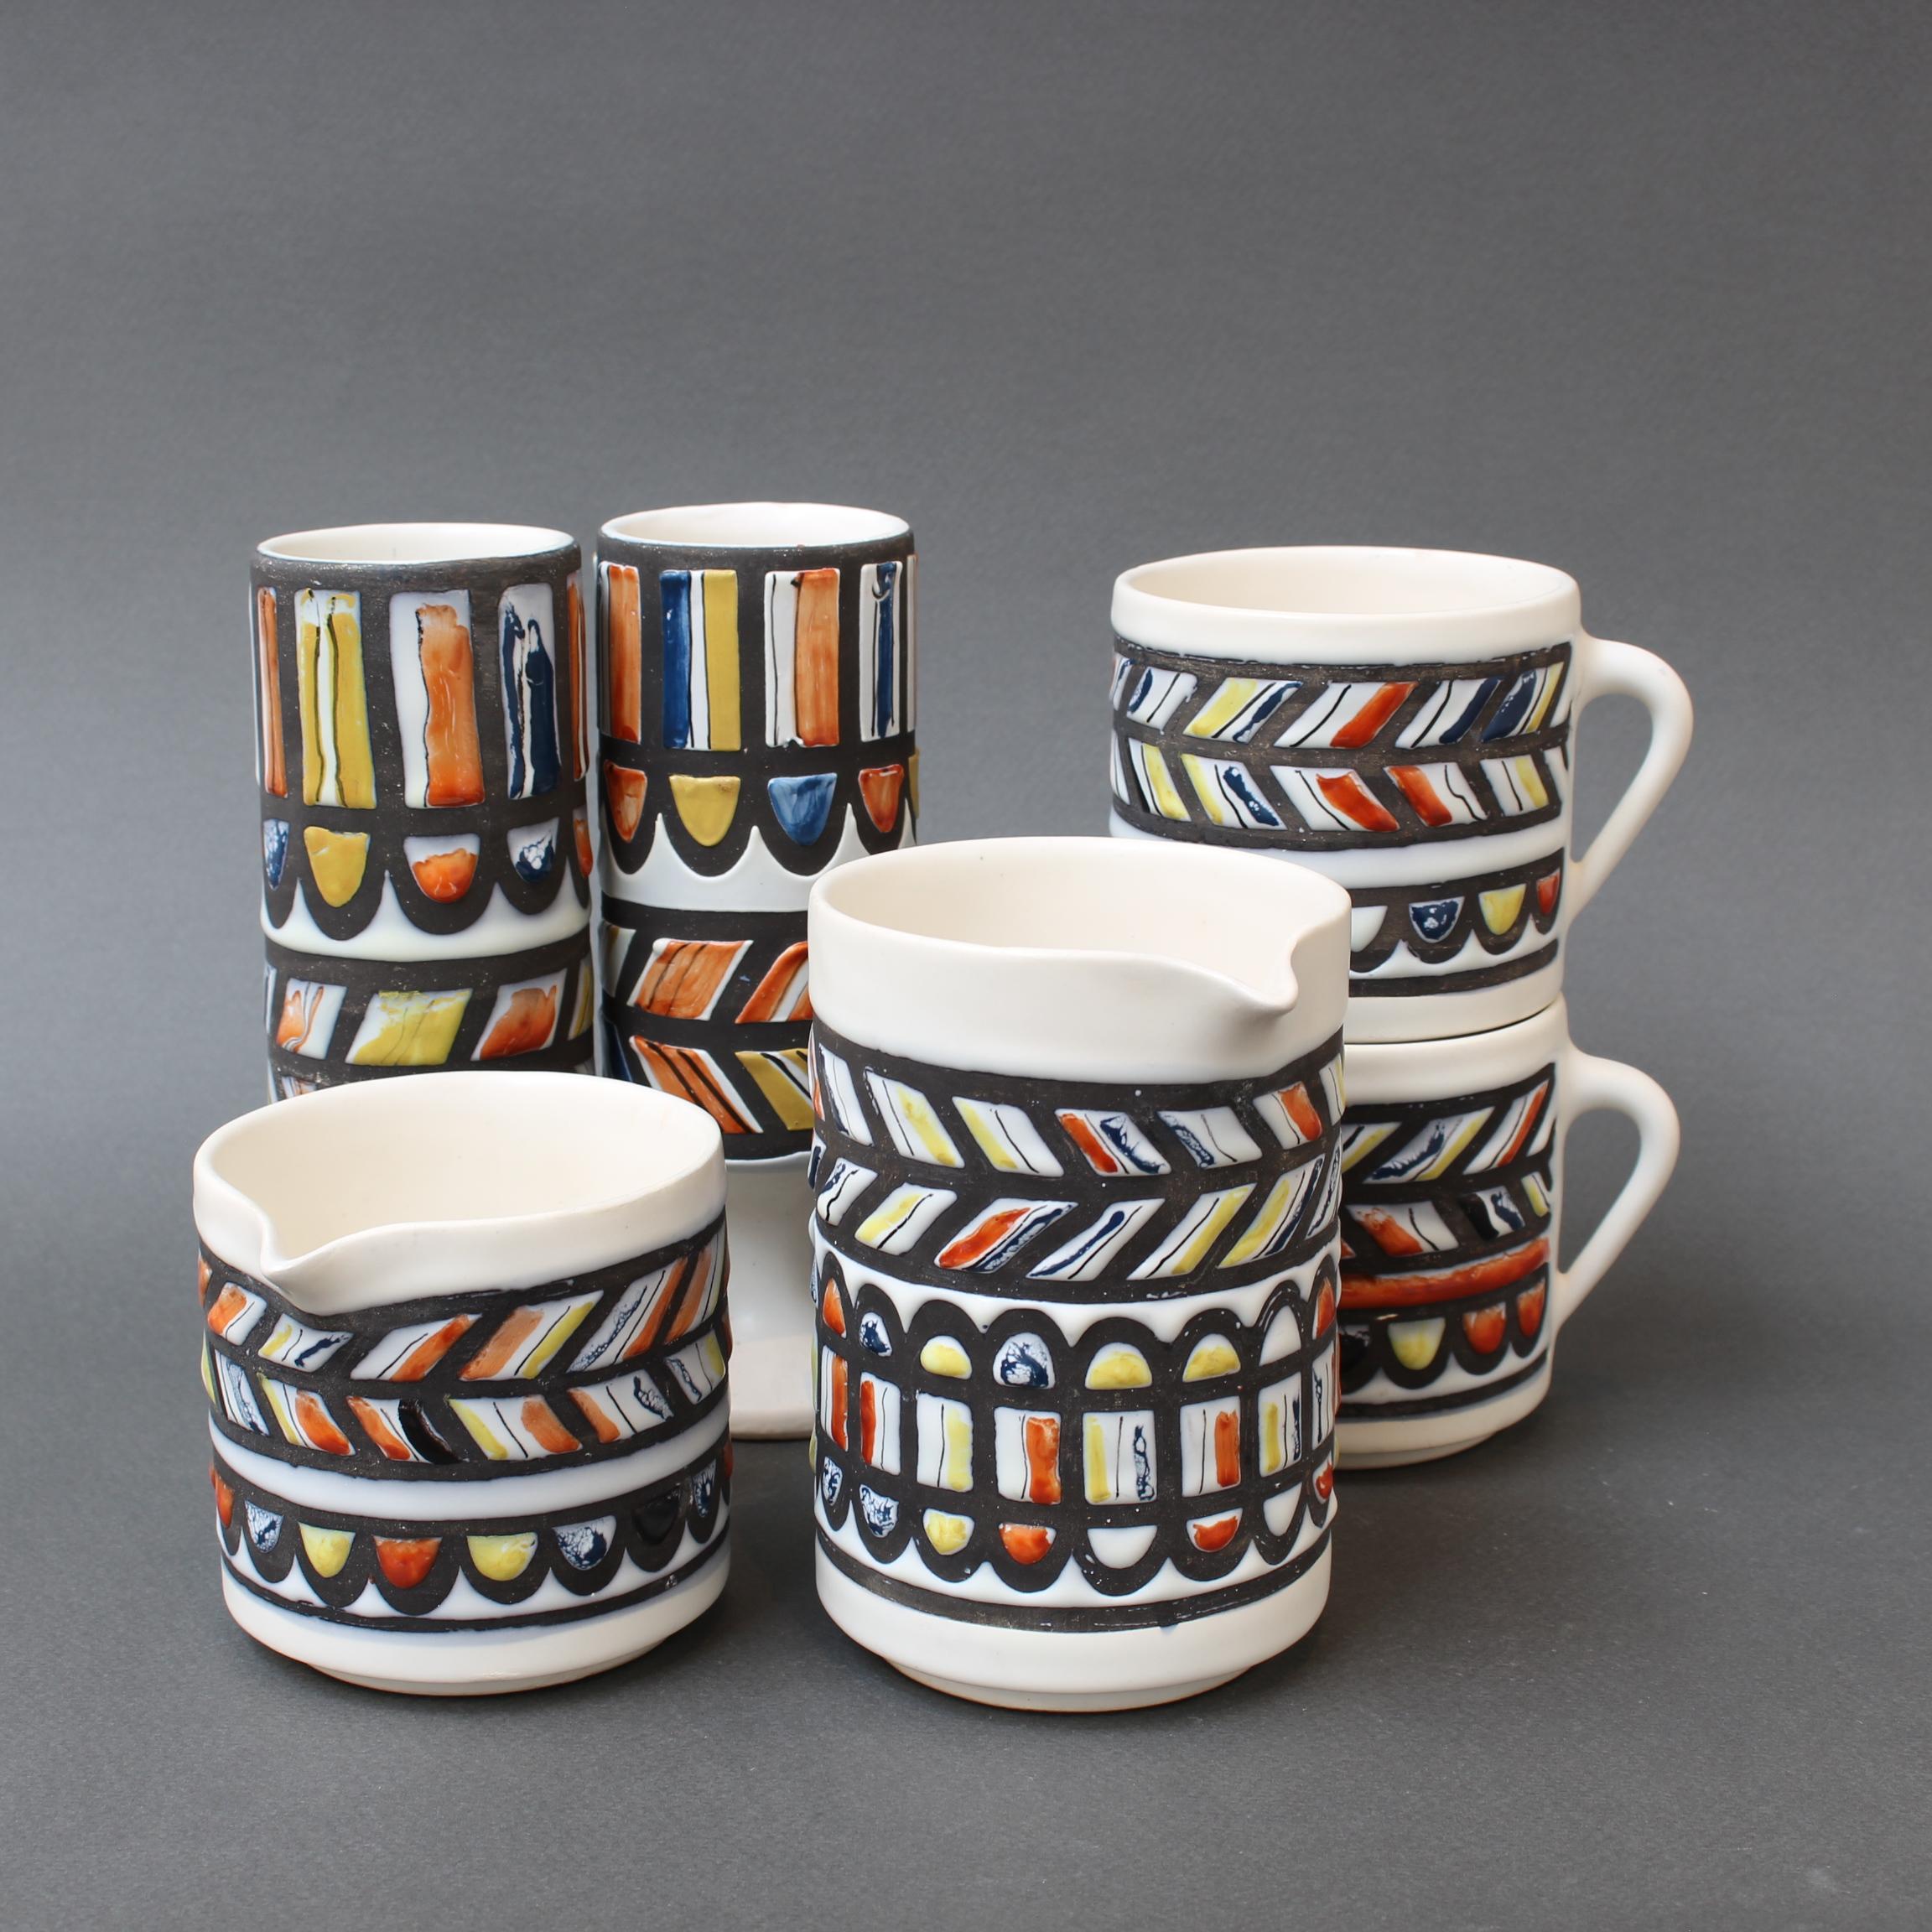 A Mid-Century French ceramic set consisting of a milk jug, a creamer, two cups and two stemmed 'glasses' by master ceramicist, Roger Capron (circa 1960s). Signed under the base with model number (the stemmed glasses have model number only). This